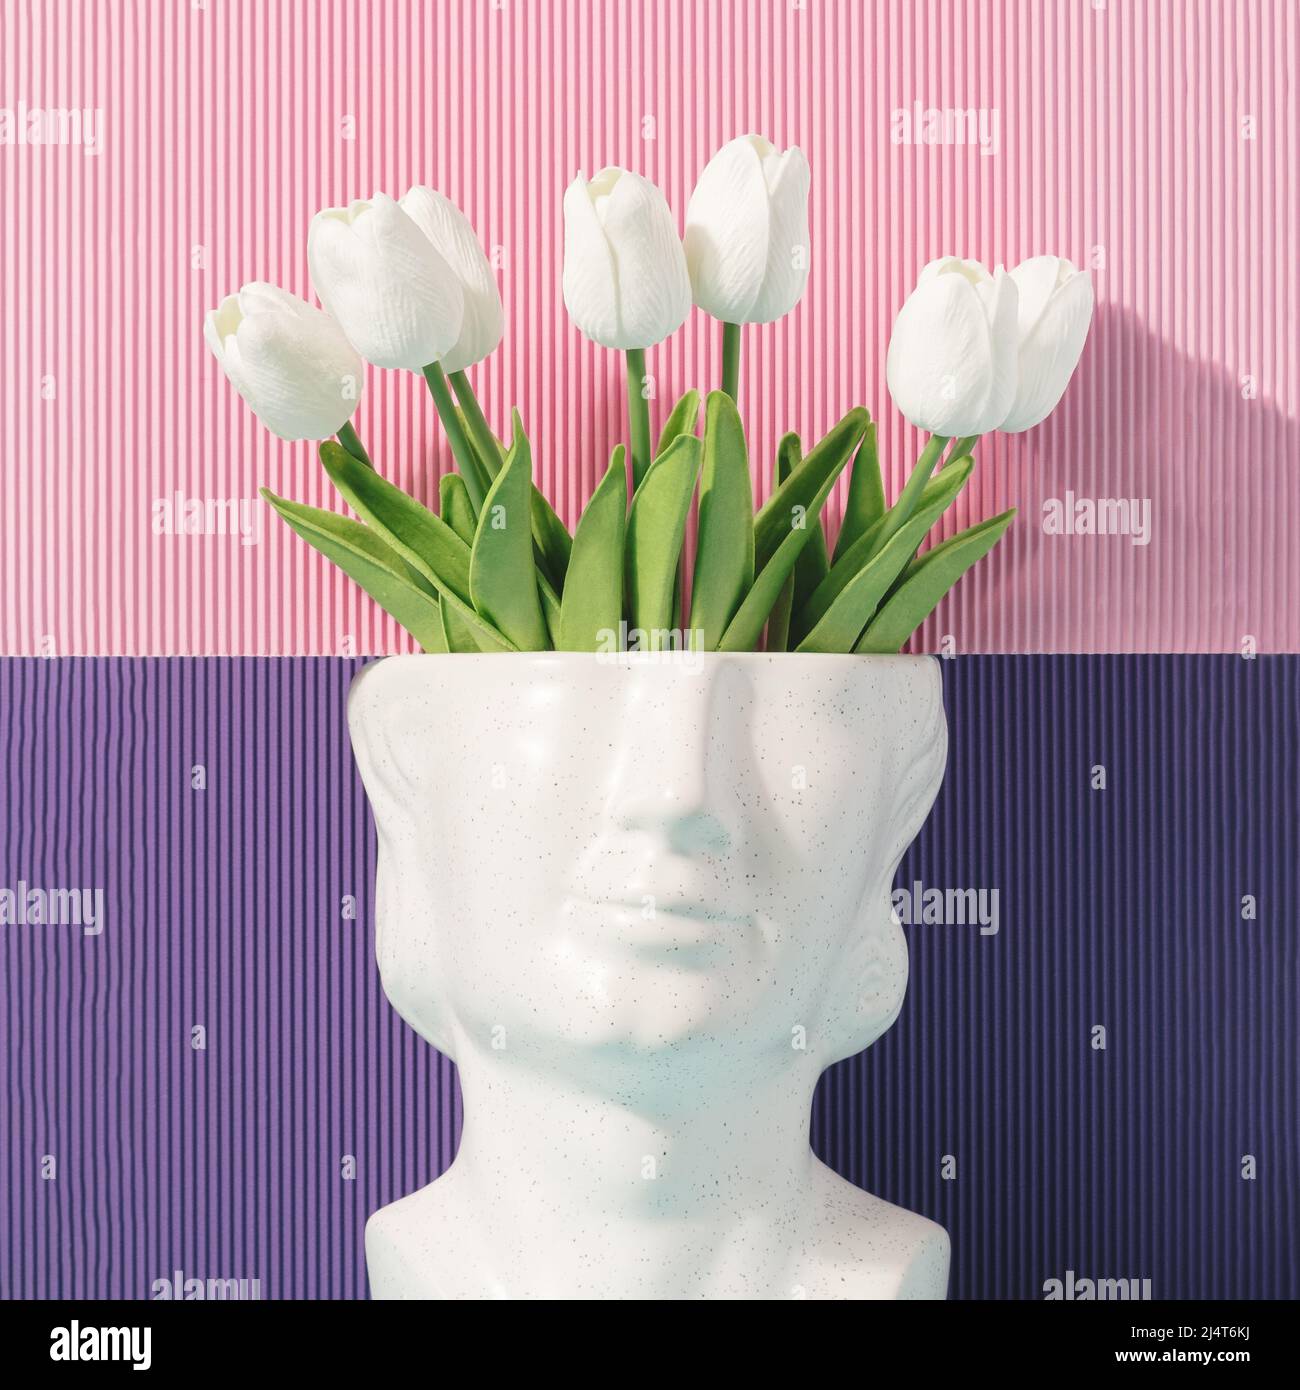 Stone head sculpture with tulip flowers on a pink and purple background. Optimistic thoughts artistic concept. Stock Photo